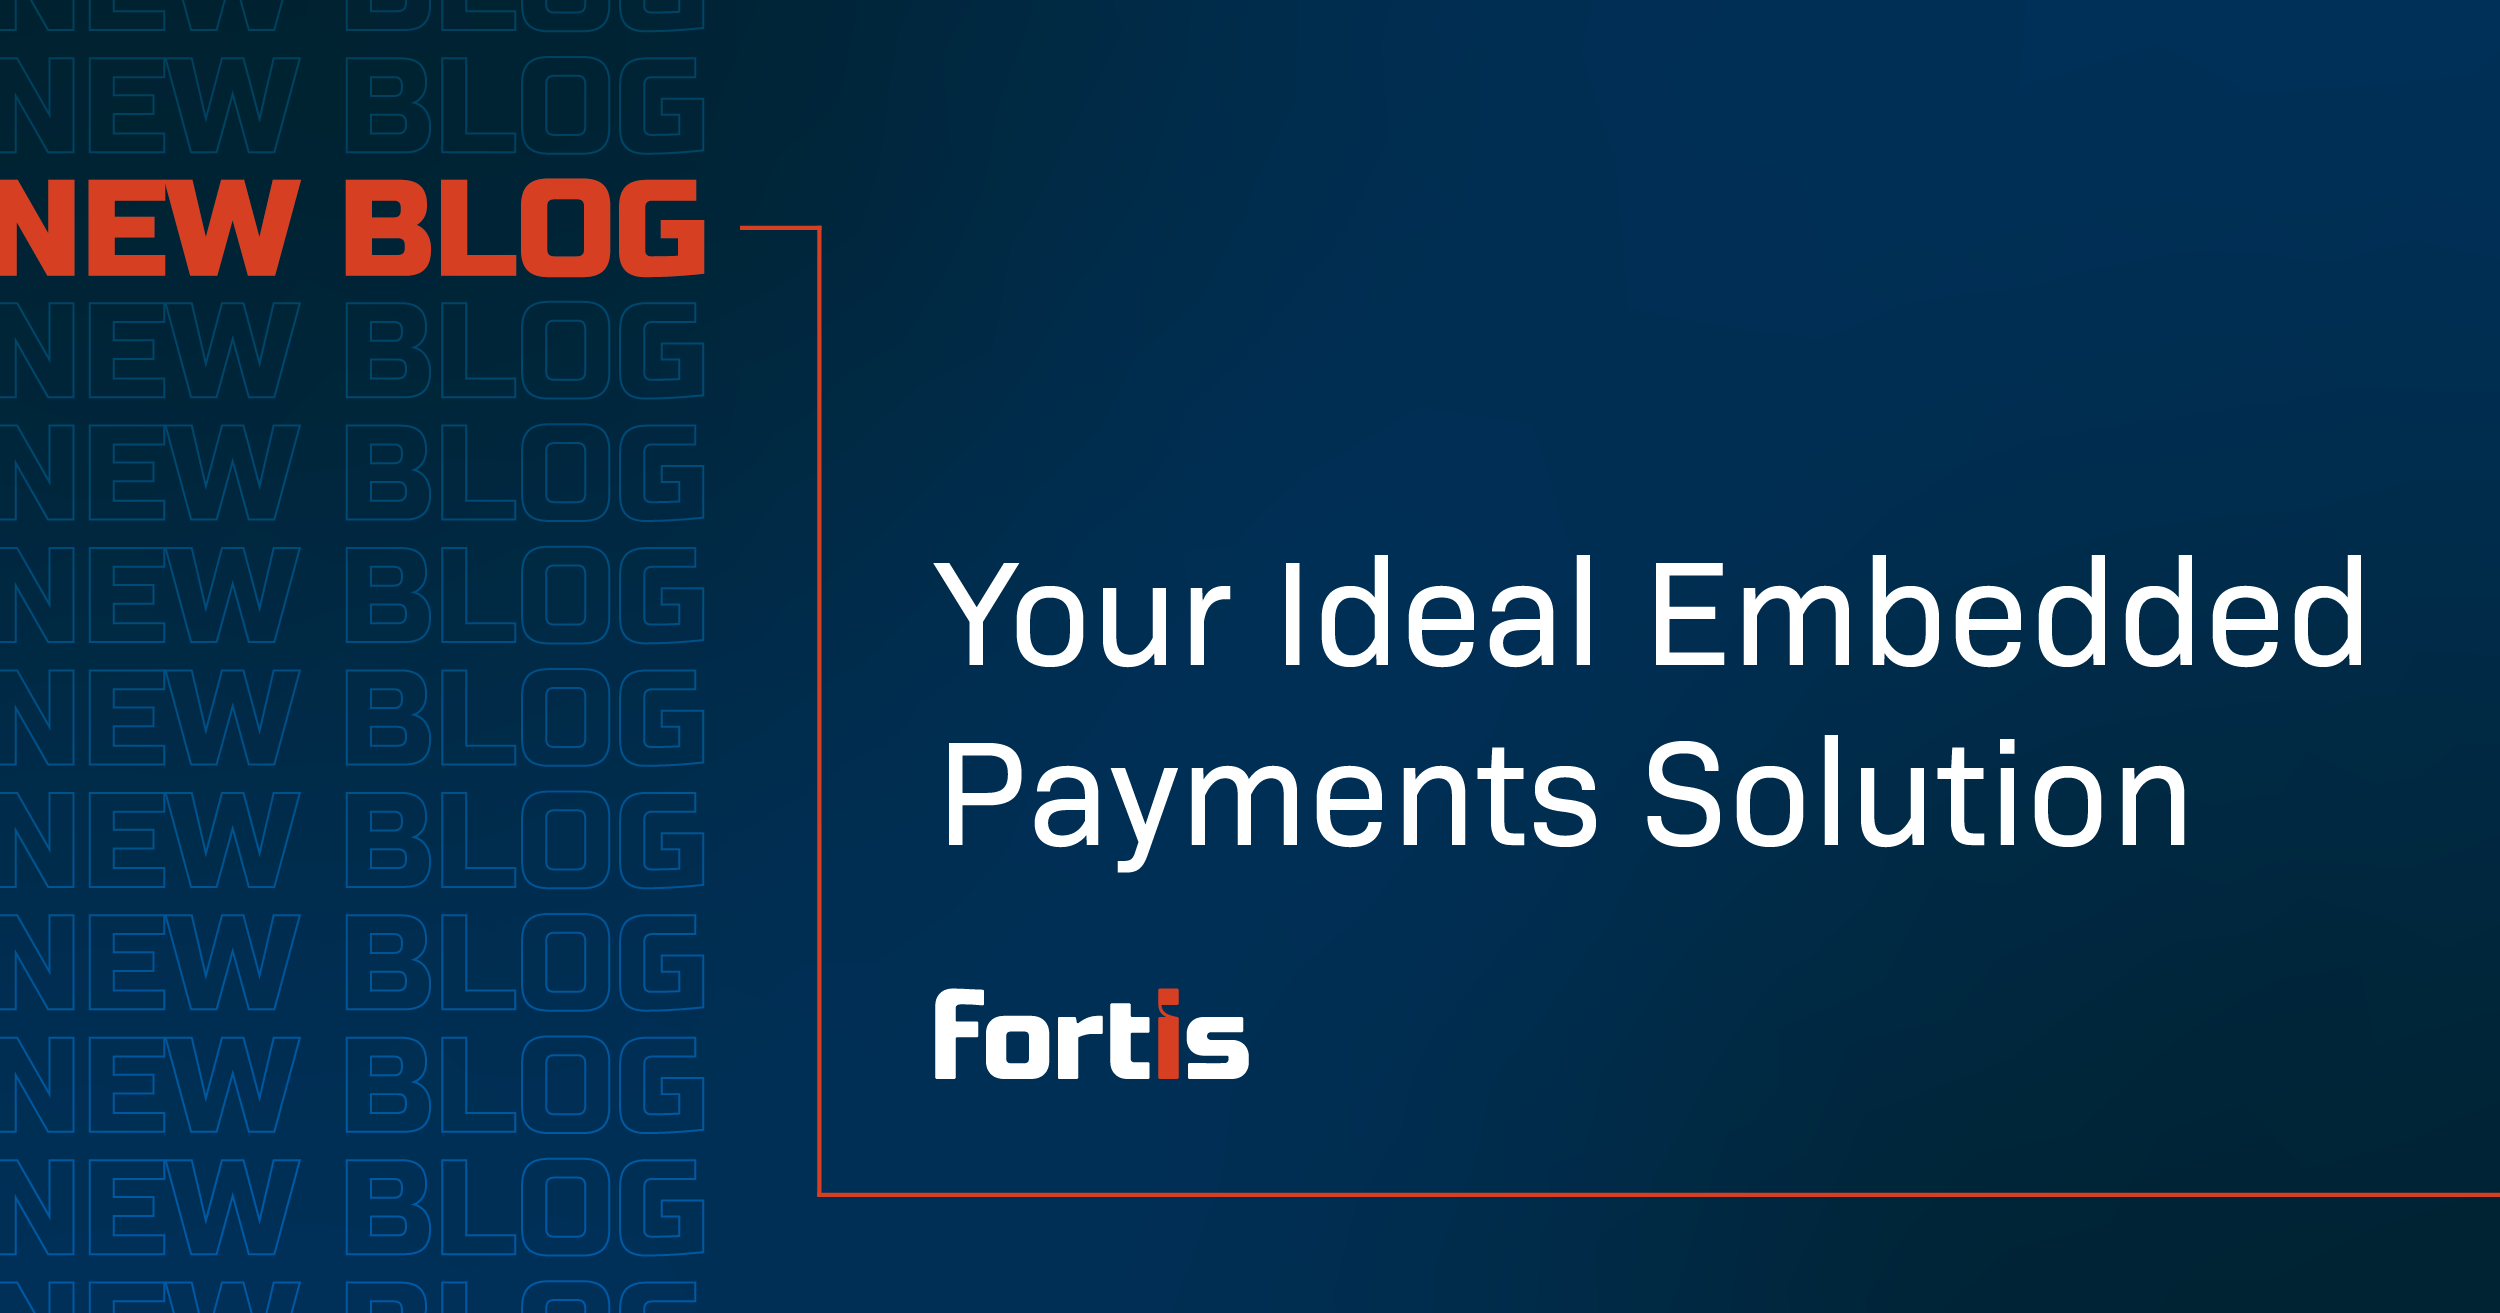 Your Ideal Embedded Payments Solution - Featured Image